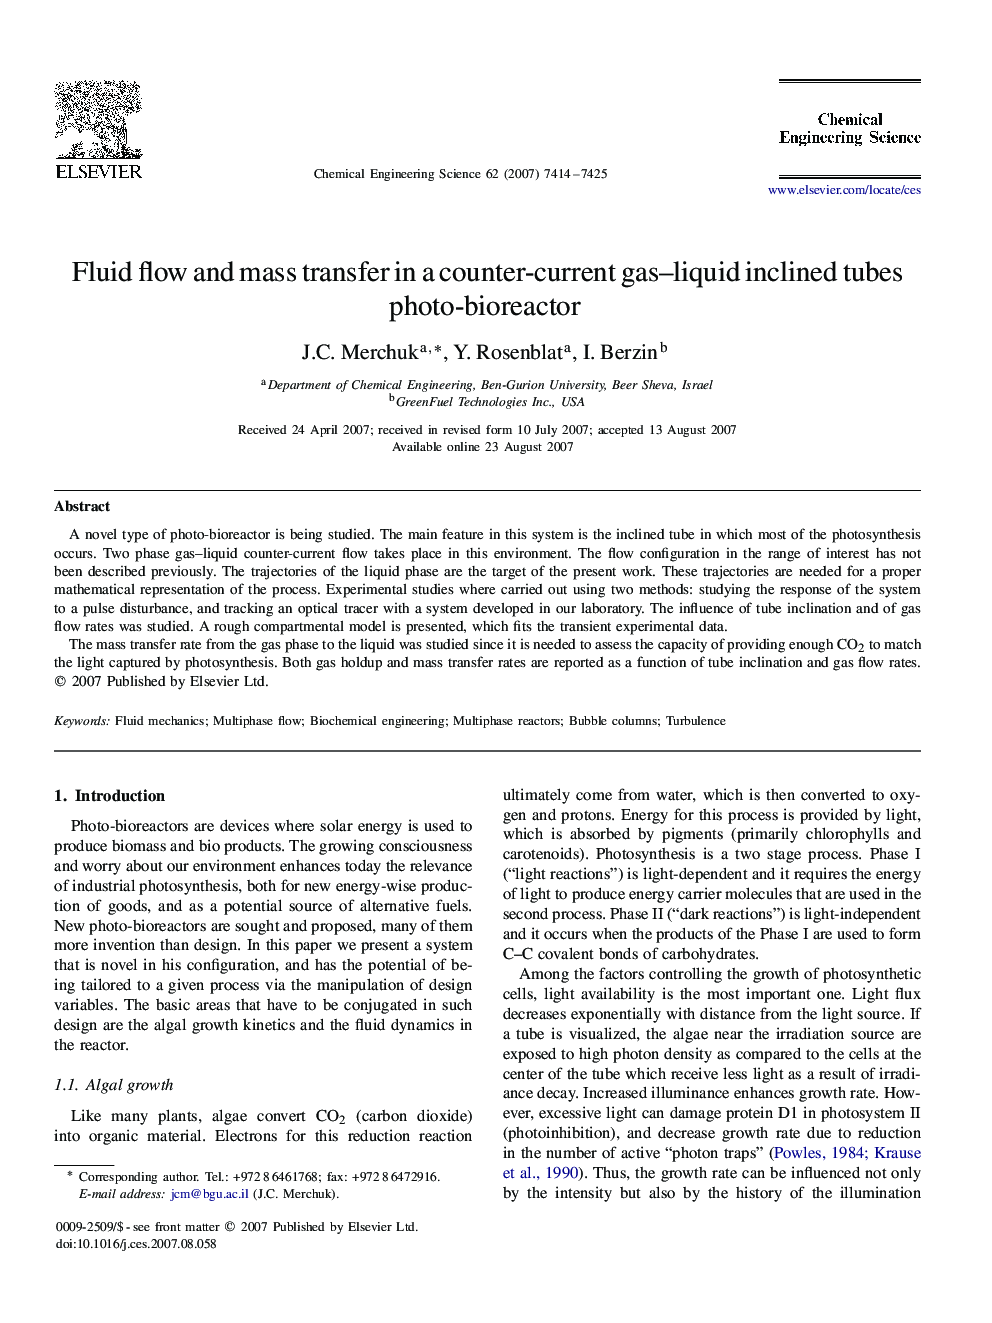 Fluid flow and mass transfer in a counter-current gas–liquid inclined tubes photo-bioreactor